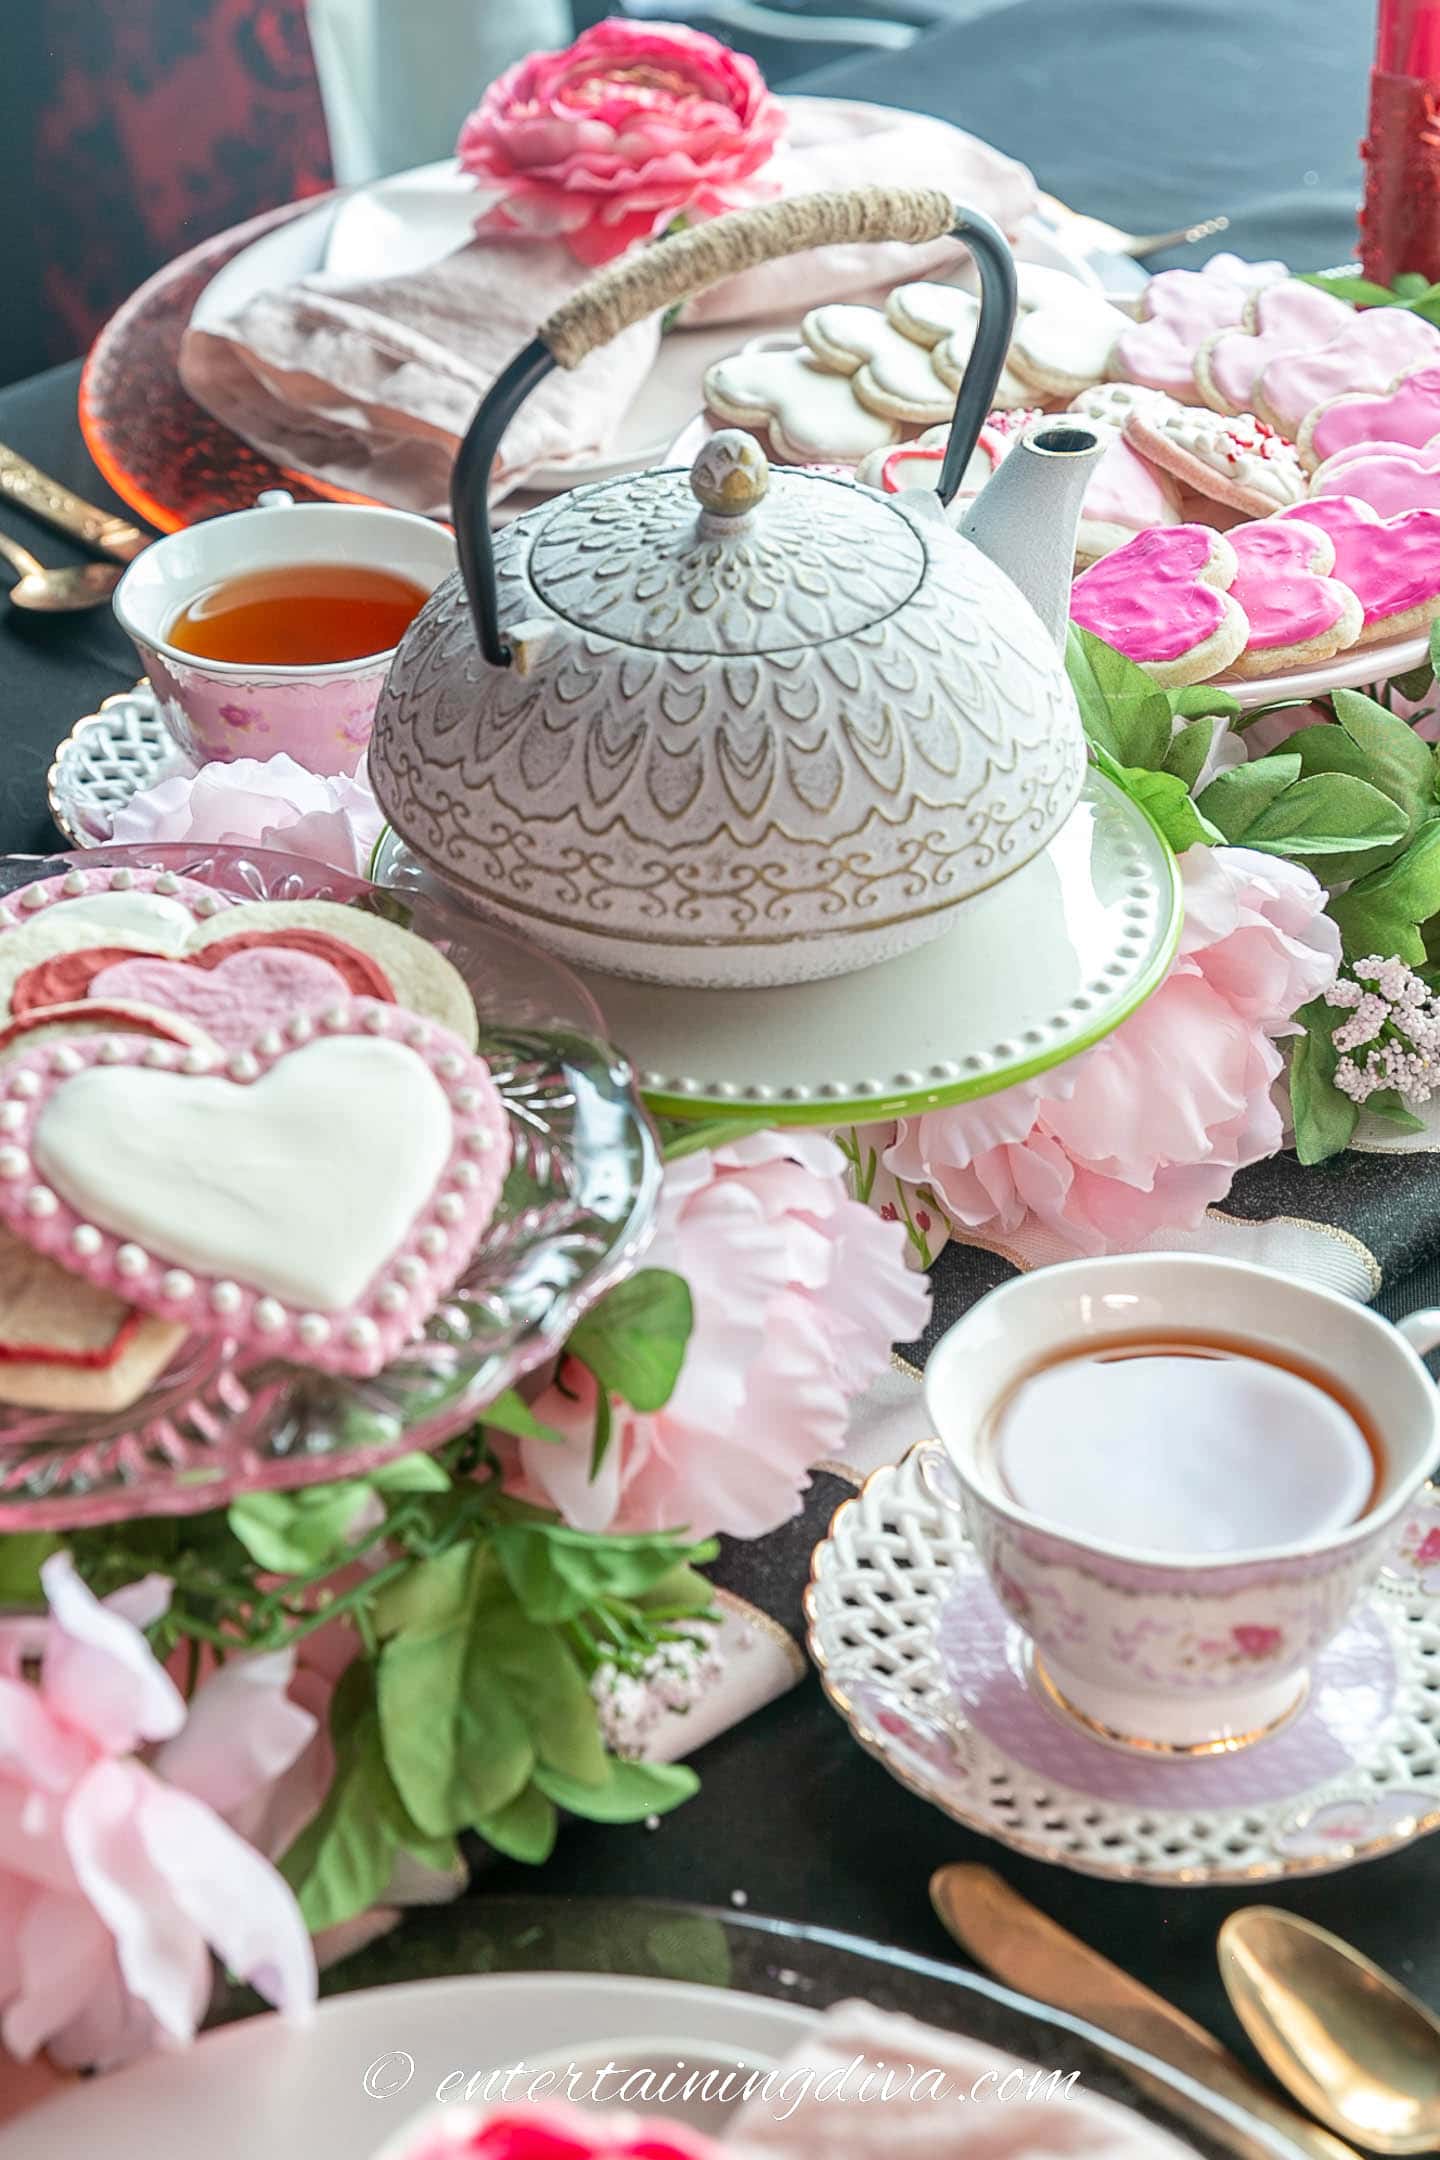 A teapot and heart cookies on cake stands above pink faux flowers as part of a Valentine's Day tea party centerpiece